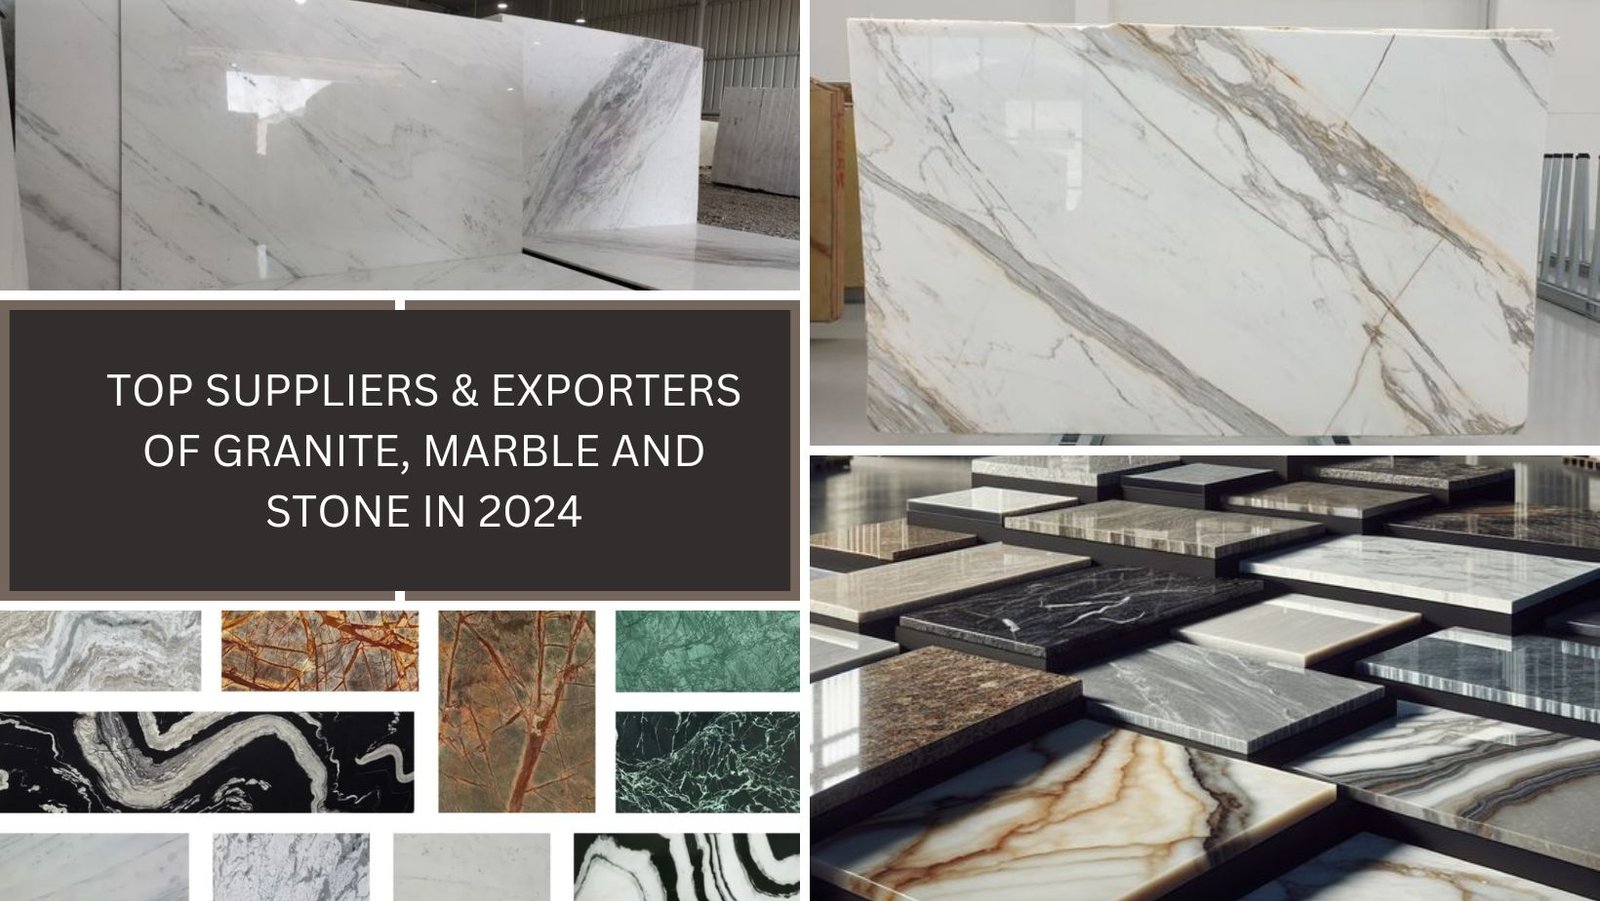 Top Suppliers & Exporters Of Granite, Marble And Stone In 2024